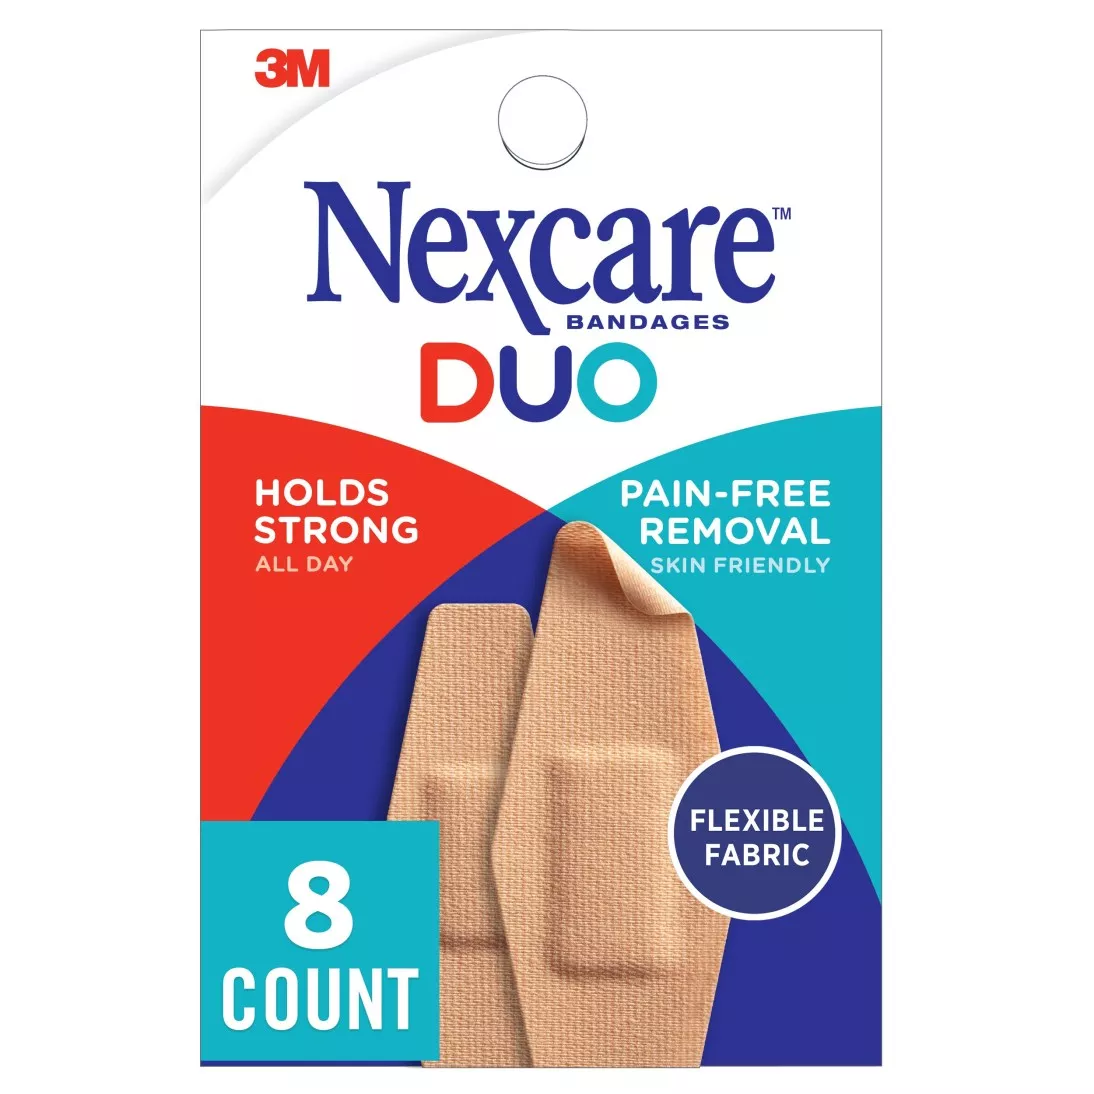 Nexcare™ DUO Bandages DSA-8CP, Convience Pack, 8ct